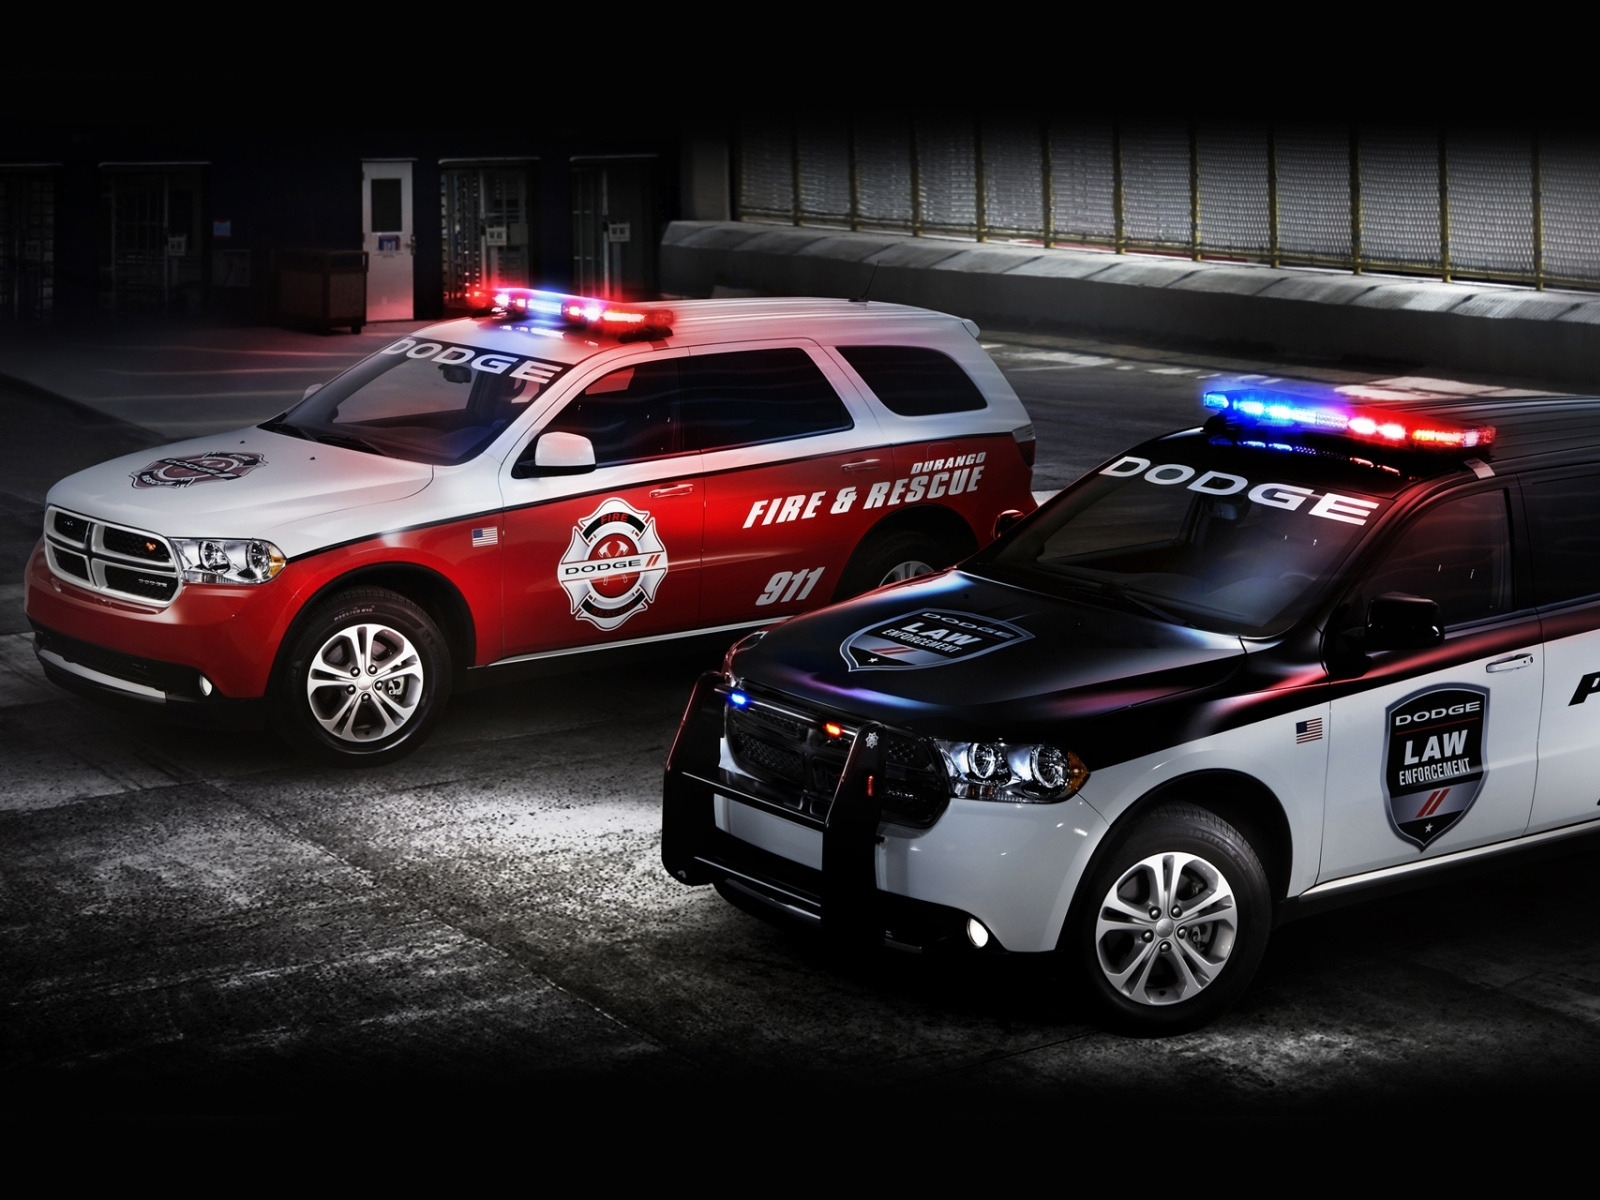 Dodge Police and Fire Cars for 1600 x 1200 resolution